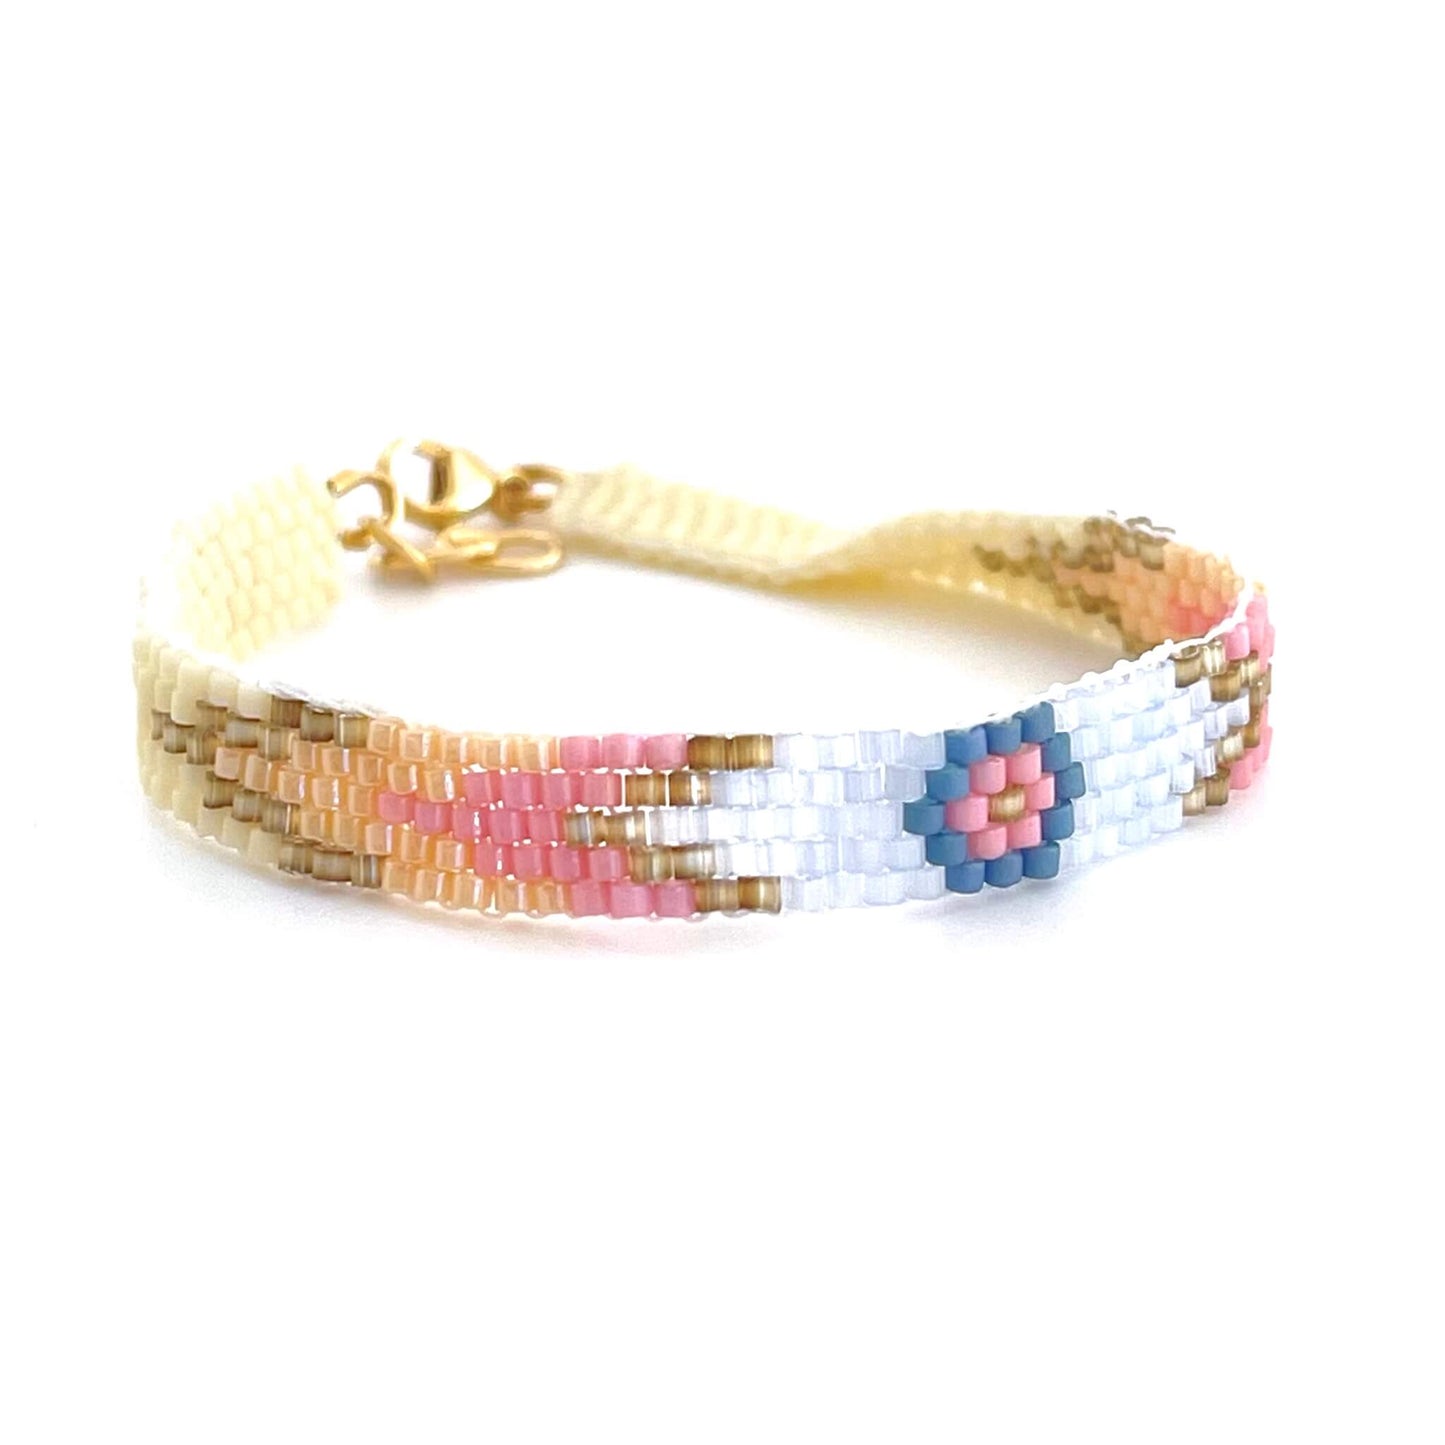 Peyote stitch pink and blue arrow pattern beaded bracelet with flower center.